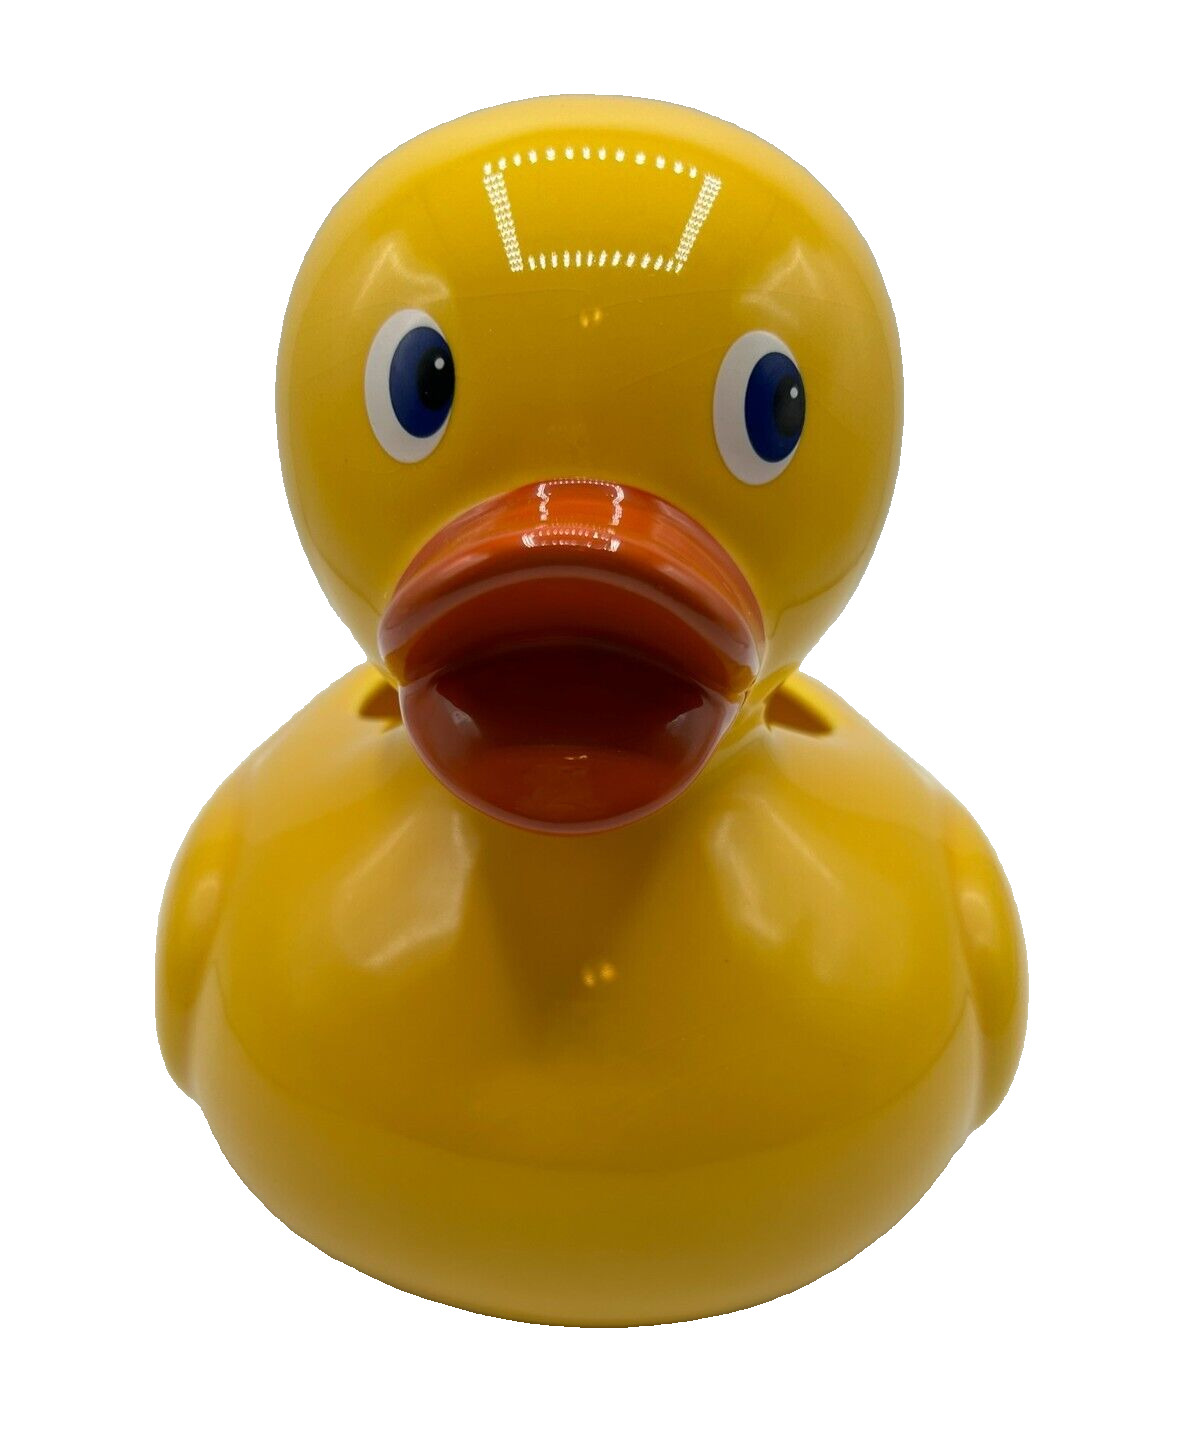 Large Yellow Rubber Ducky Planter Container TeleFlora Gifts Ceramic Duck 9\